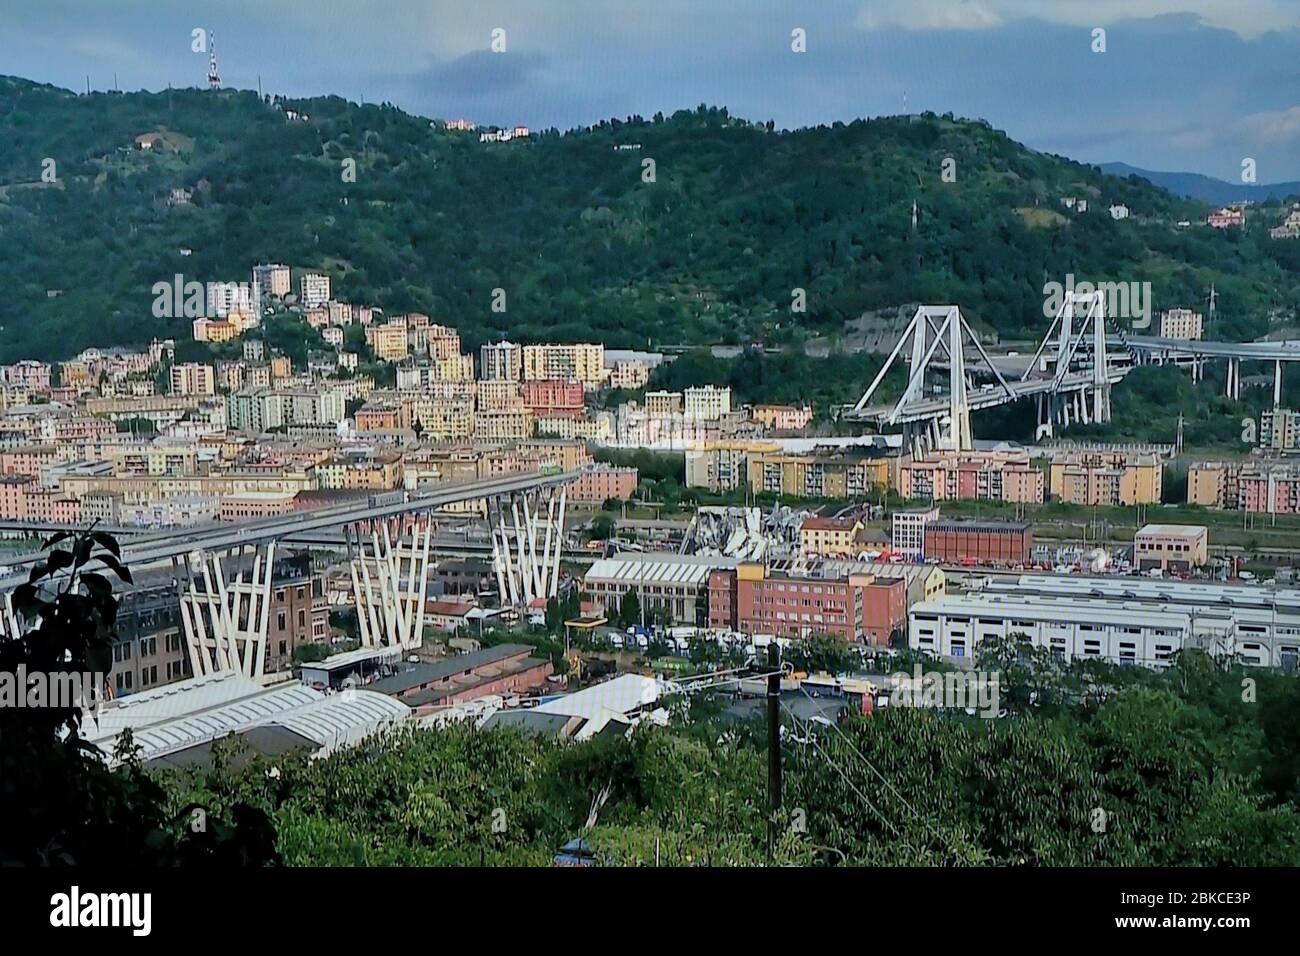 Genoa, Italy, the collapsed Morandi Bridge (polcevera viaduct), connecting A10 motorway after structural failure causing 43 casualties -  August 14th 2018 Stock Photo